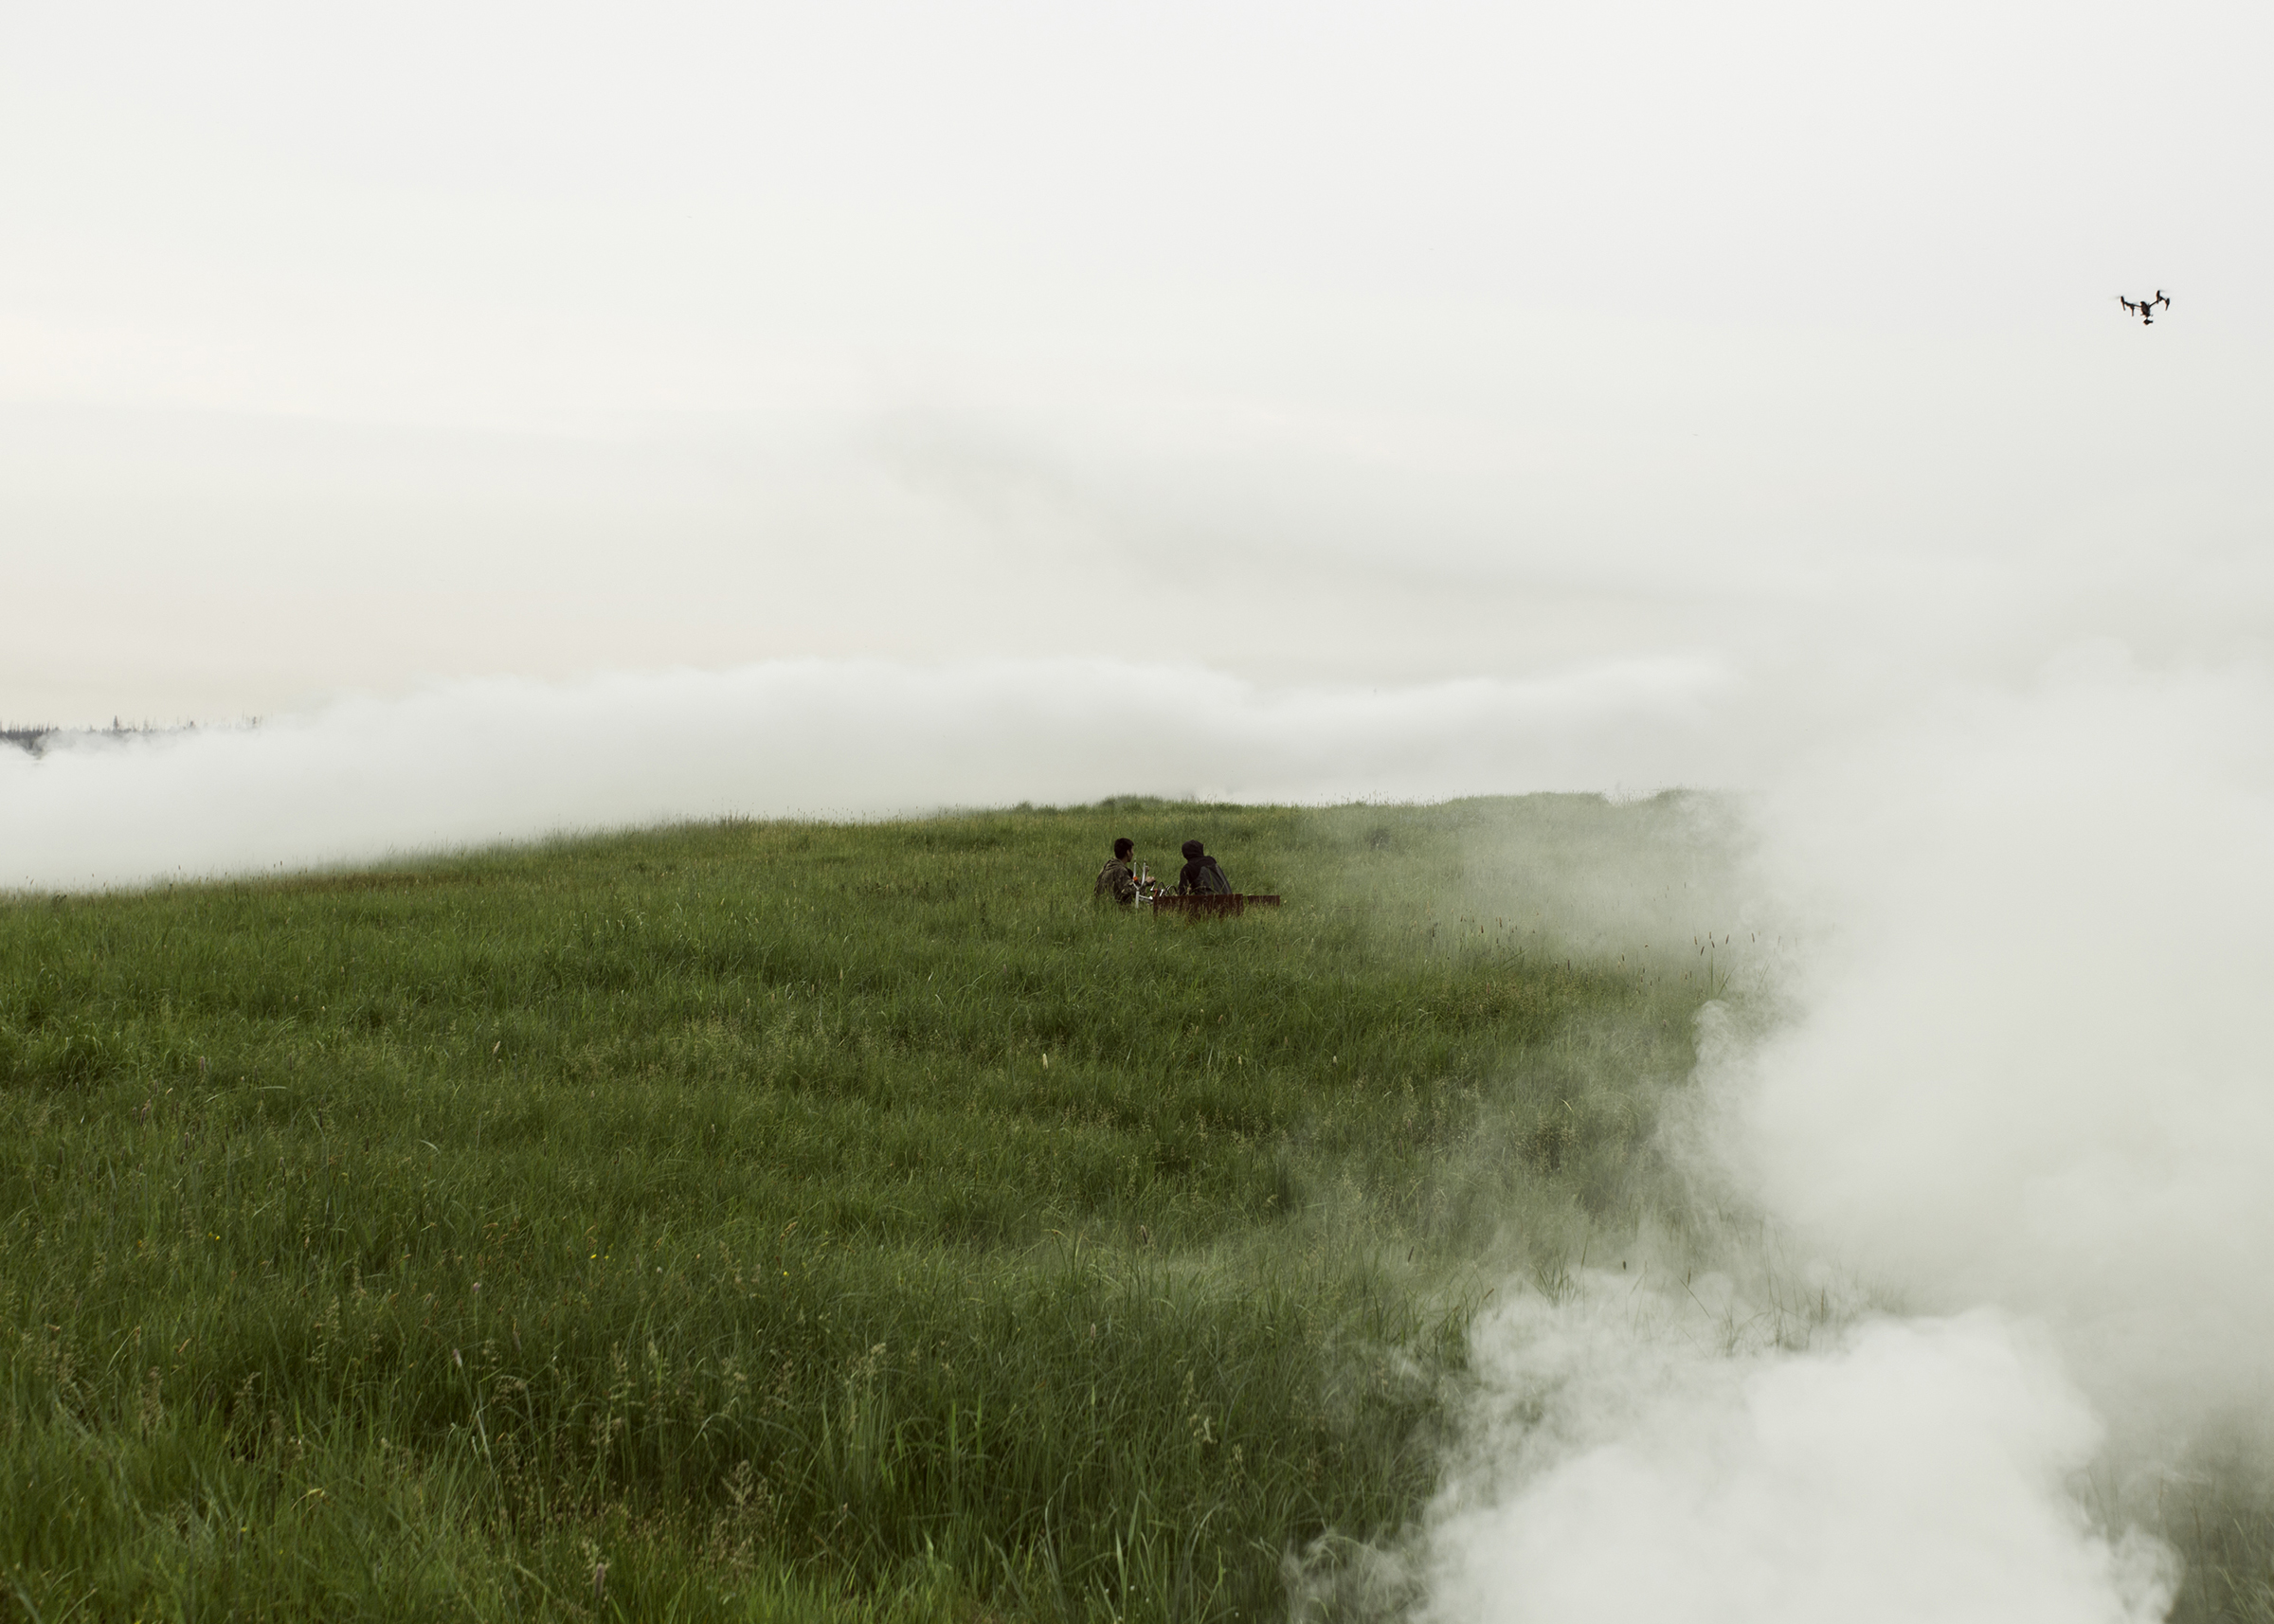 On the set of the horror film 'The Cursed Land', directed by Stepan Burnashev. Military smoke bombs were used to create a foggy atmosphere. (Alexey Vasilyev)